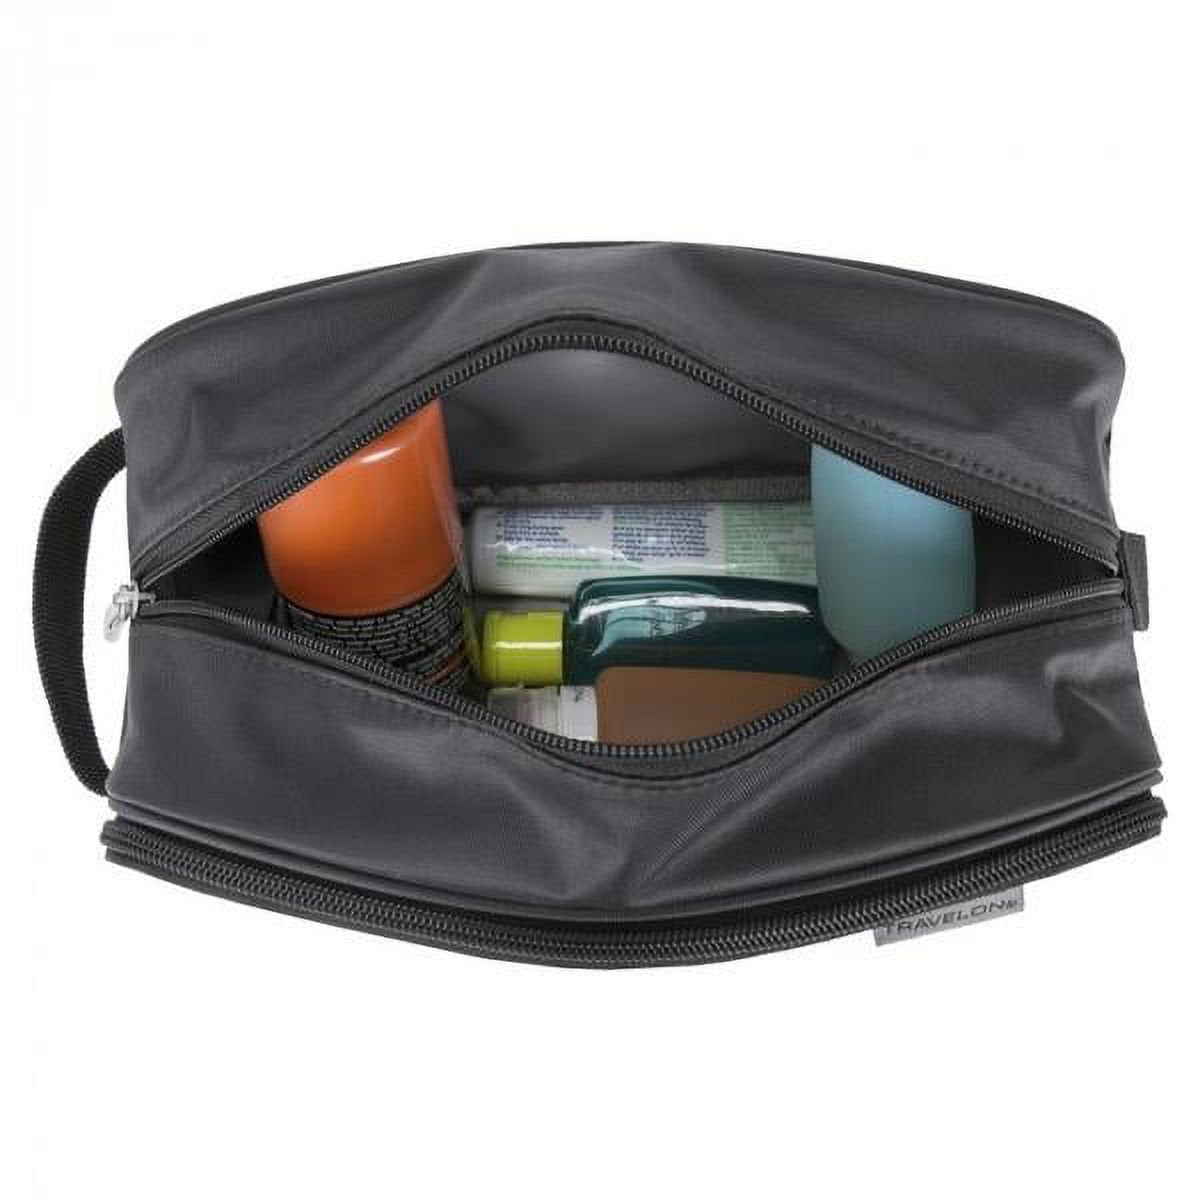 AAA.com l Travelon Compact Hanging Toiletry Kit